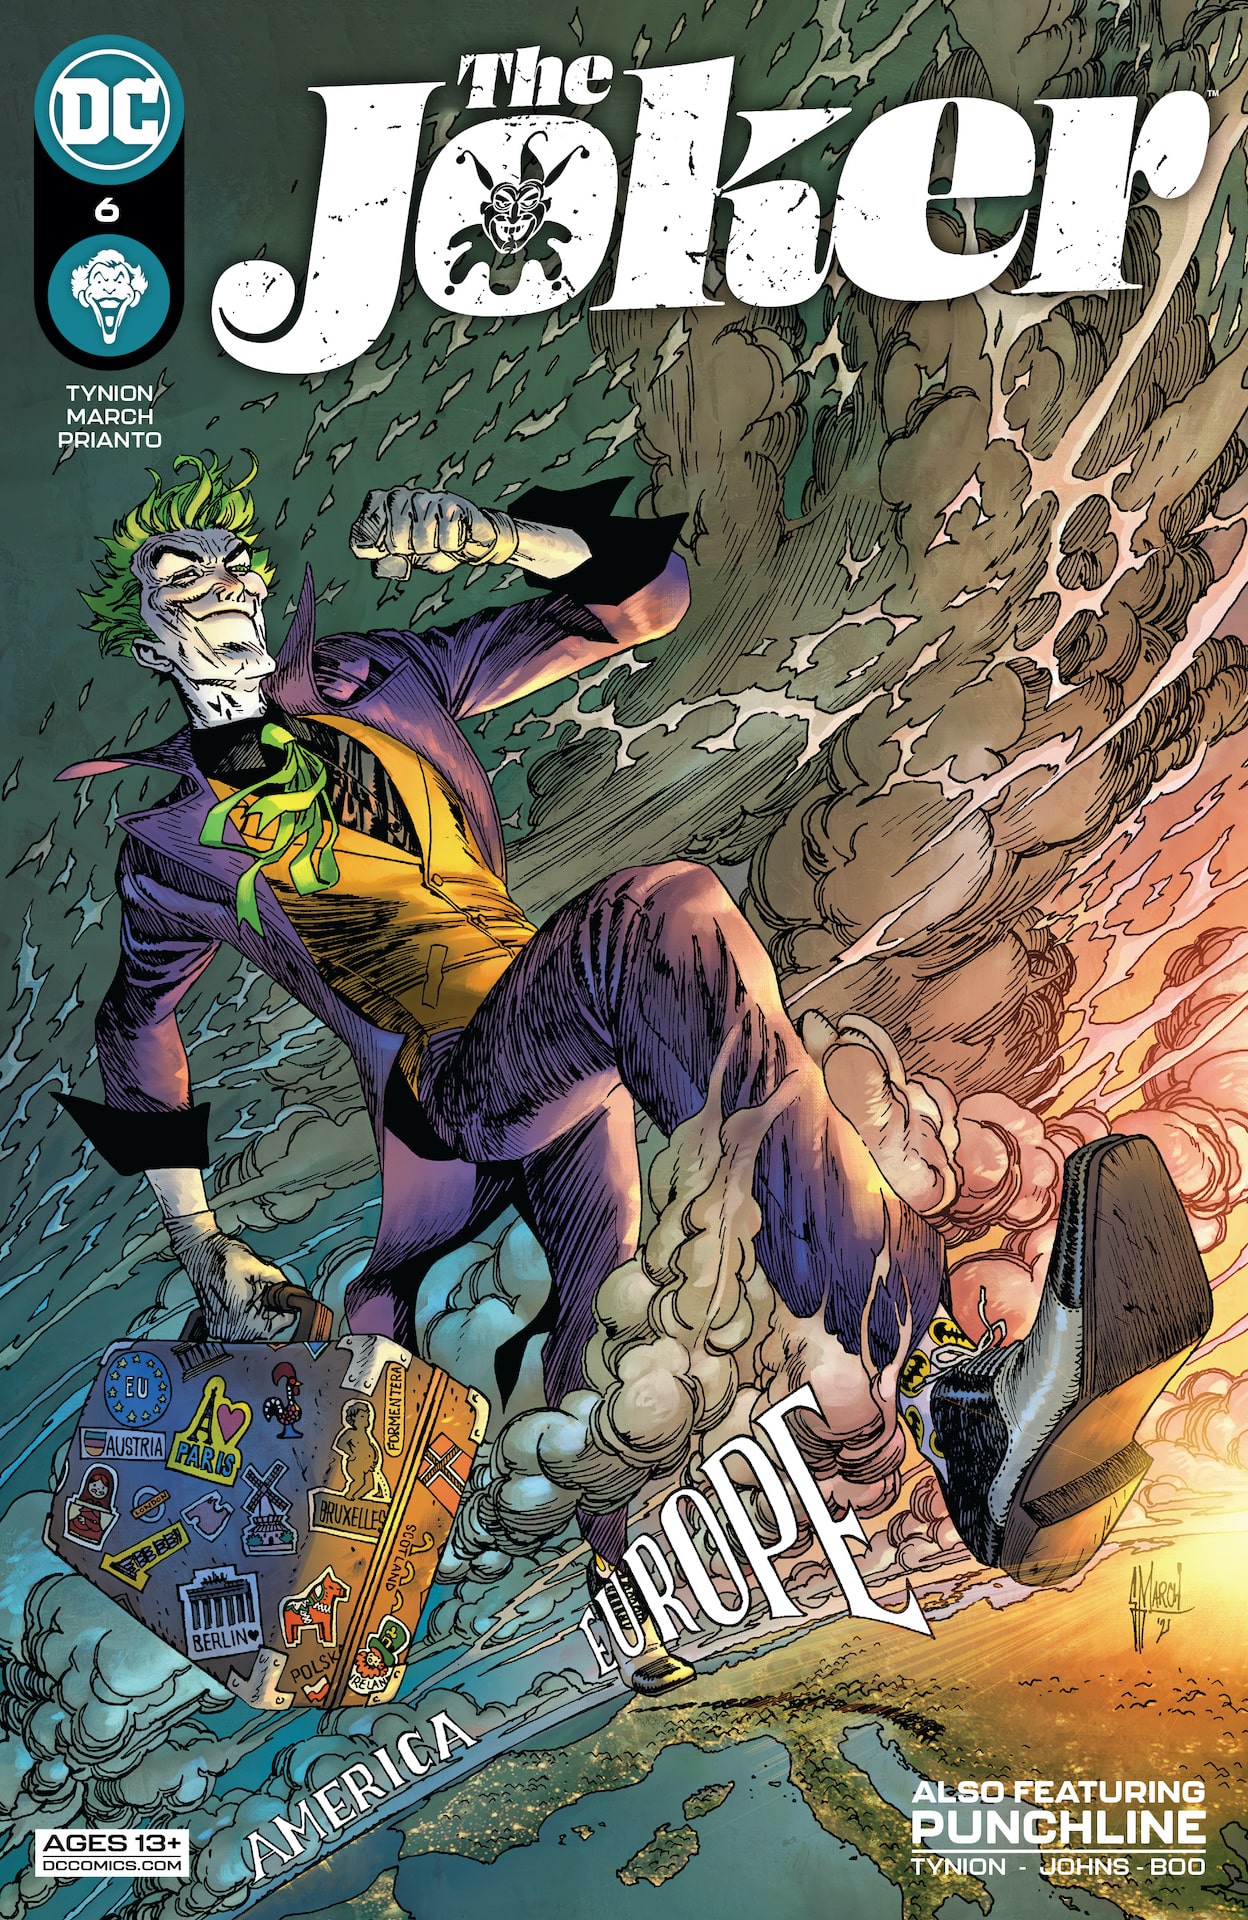 DC Preview: The Joker #6